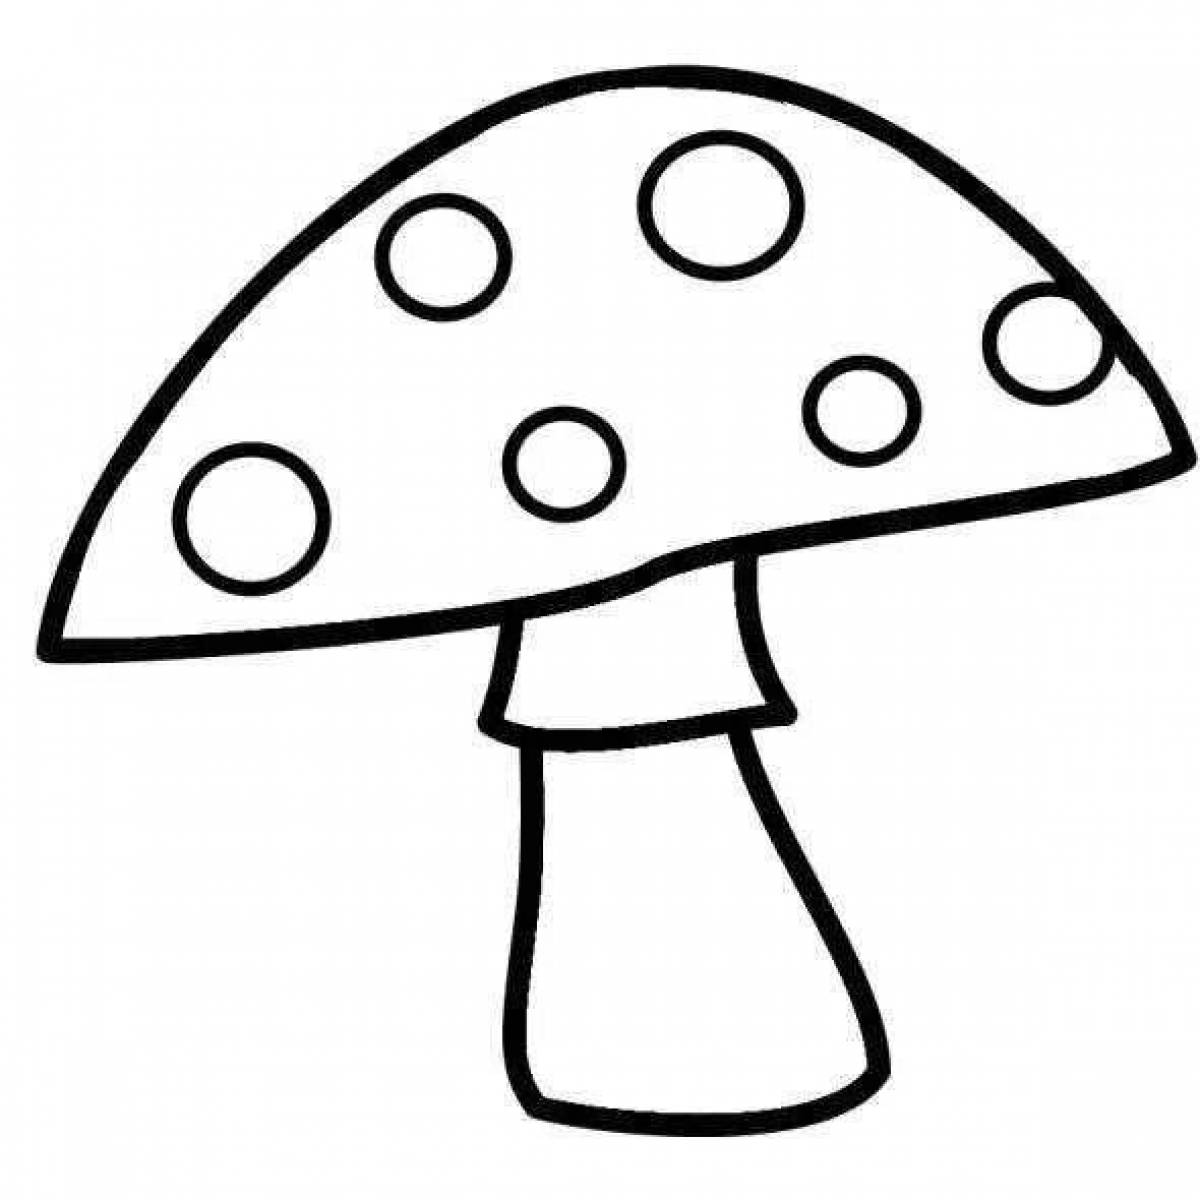 Attractive coloring of fly agaric mushrooms